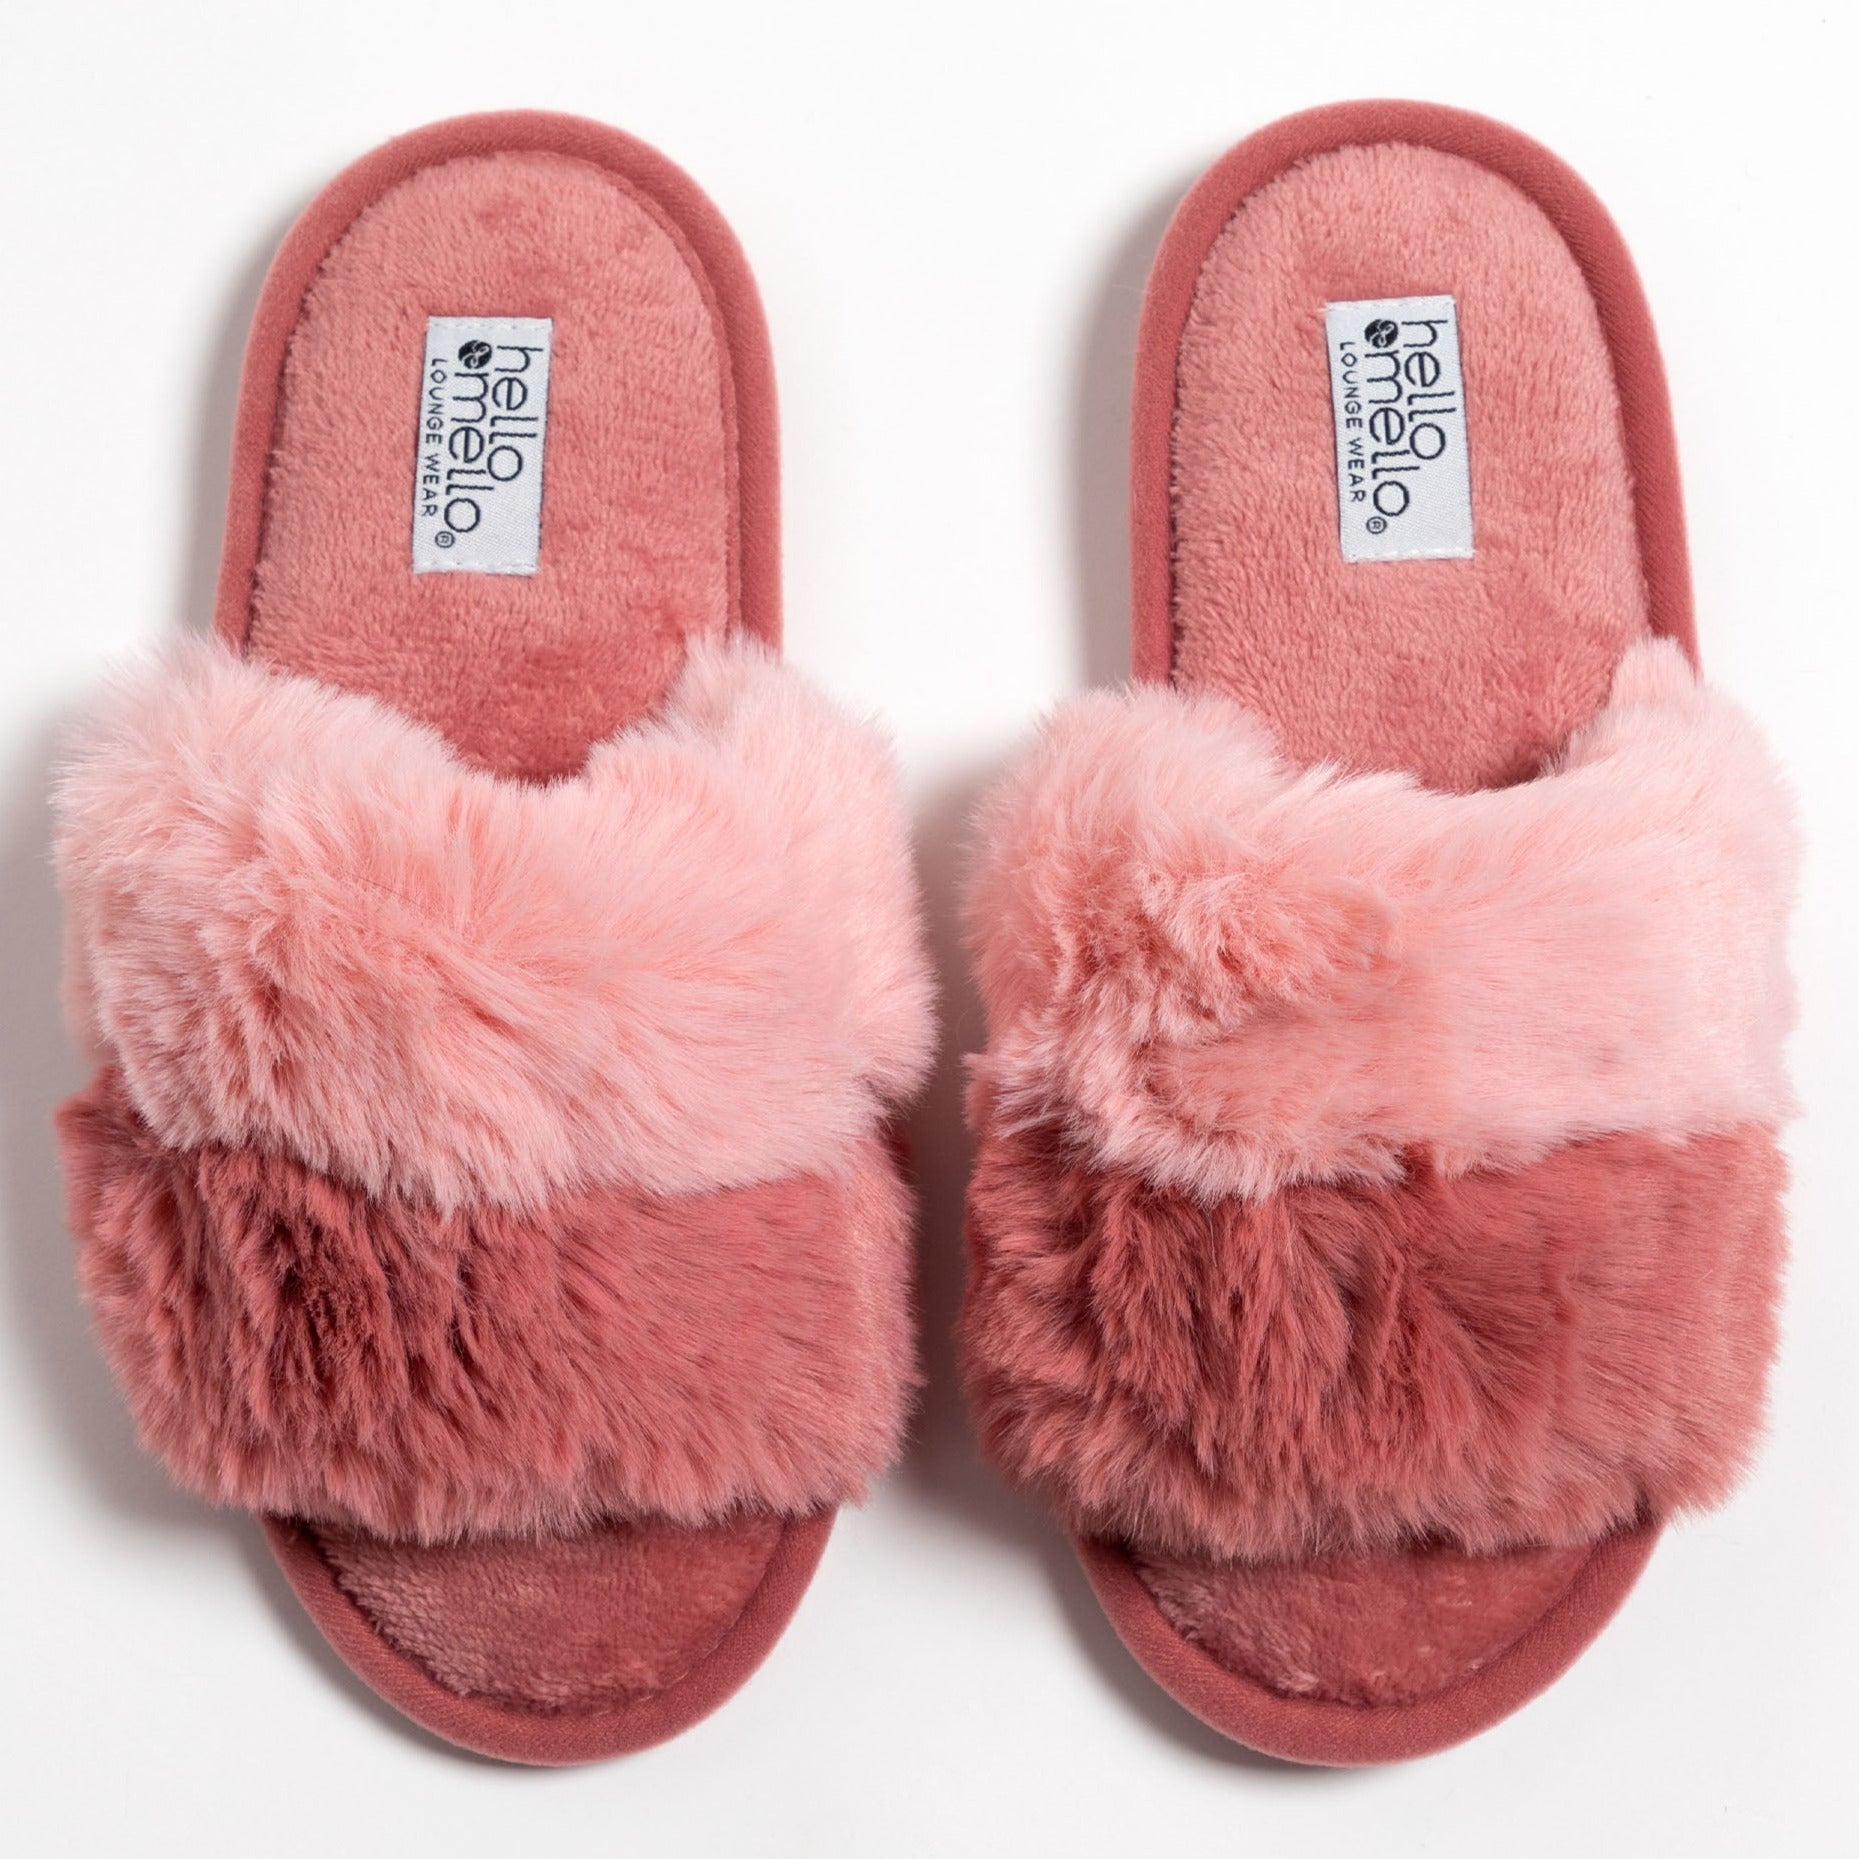 Cotton Candy Puff Slide Slippers - Berry - S/M